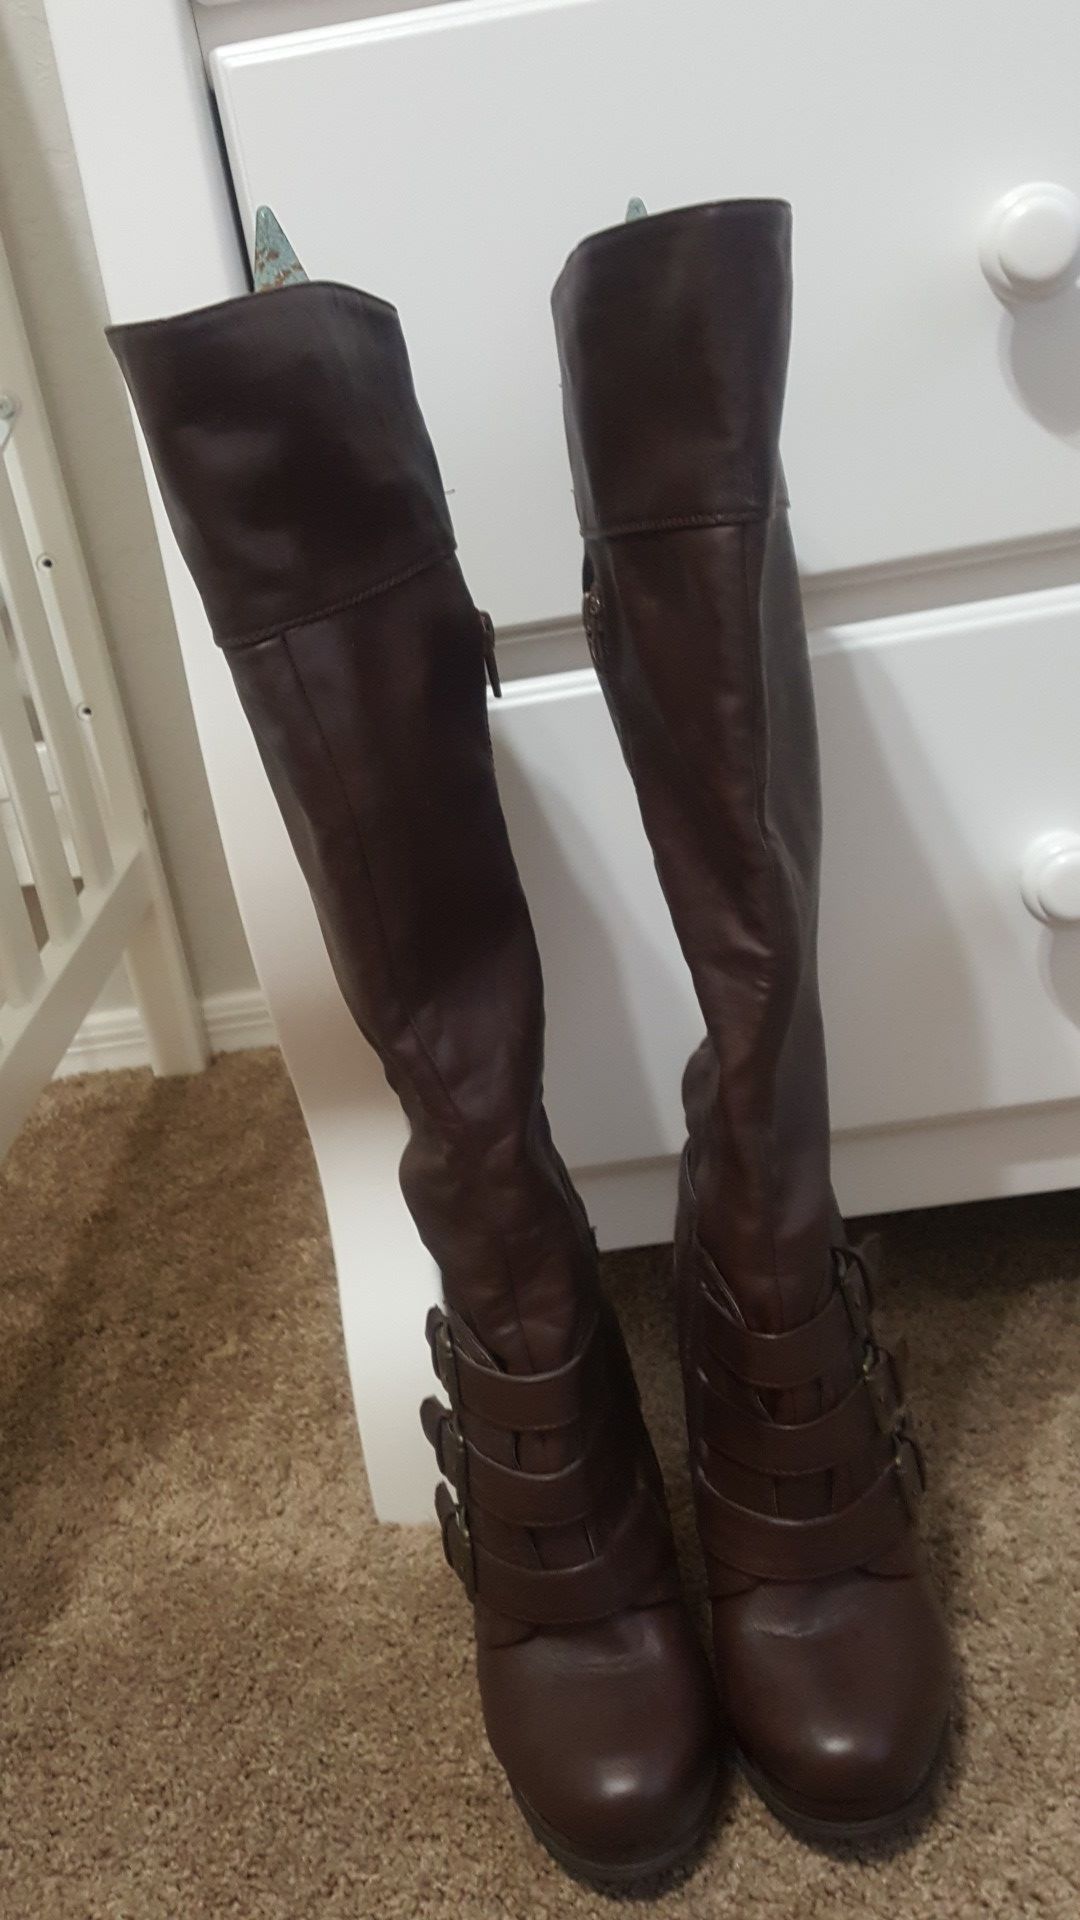 Bamboo knee high boots